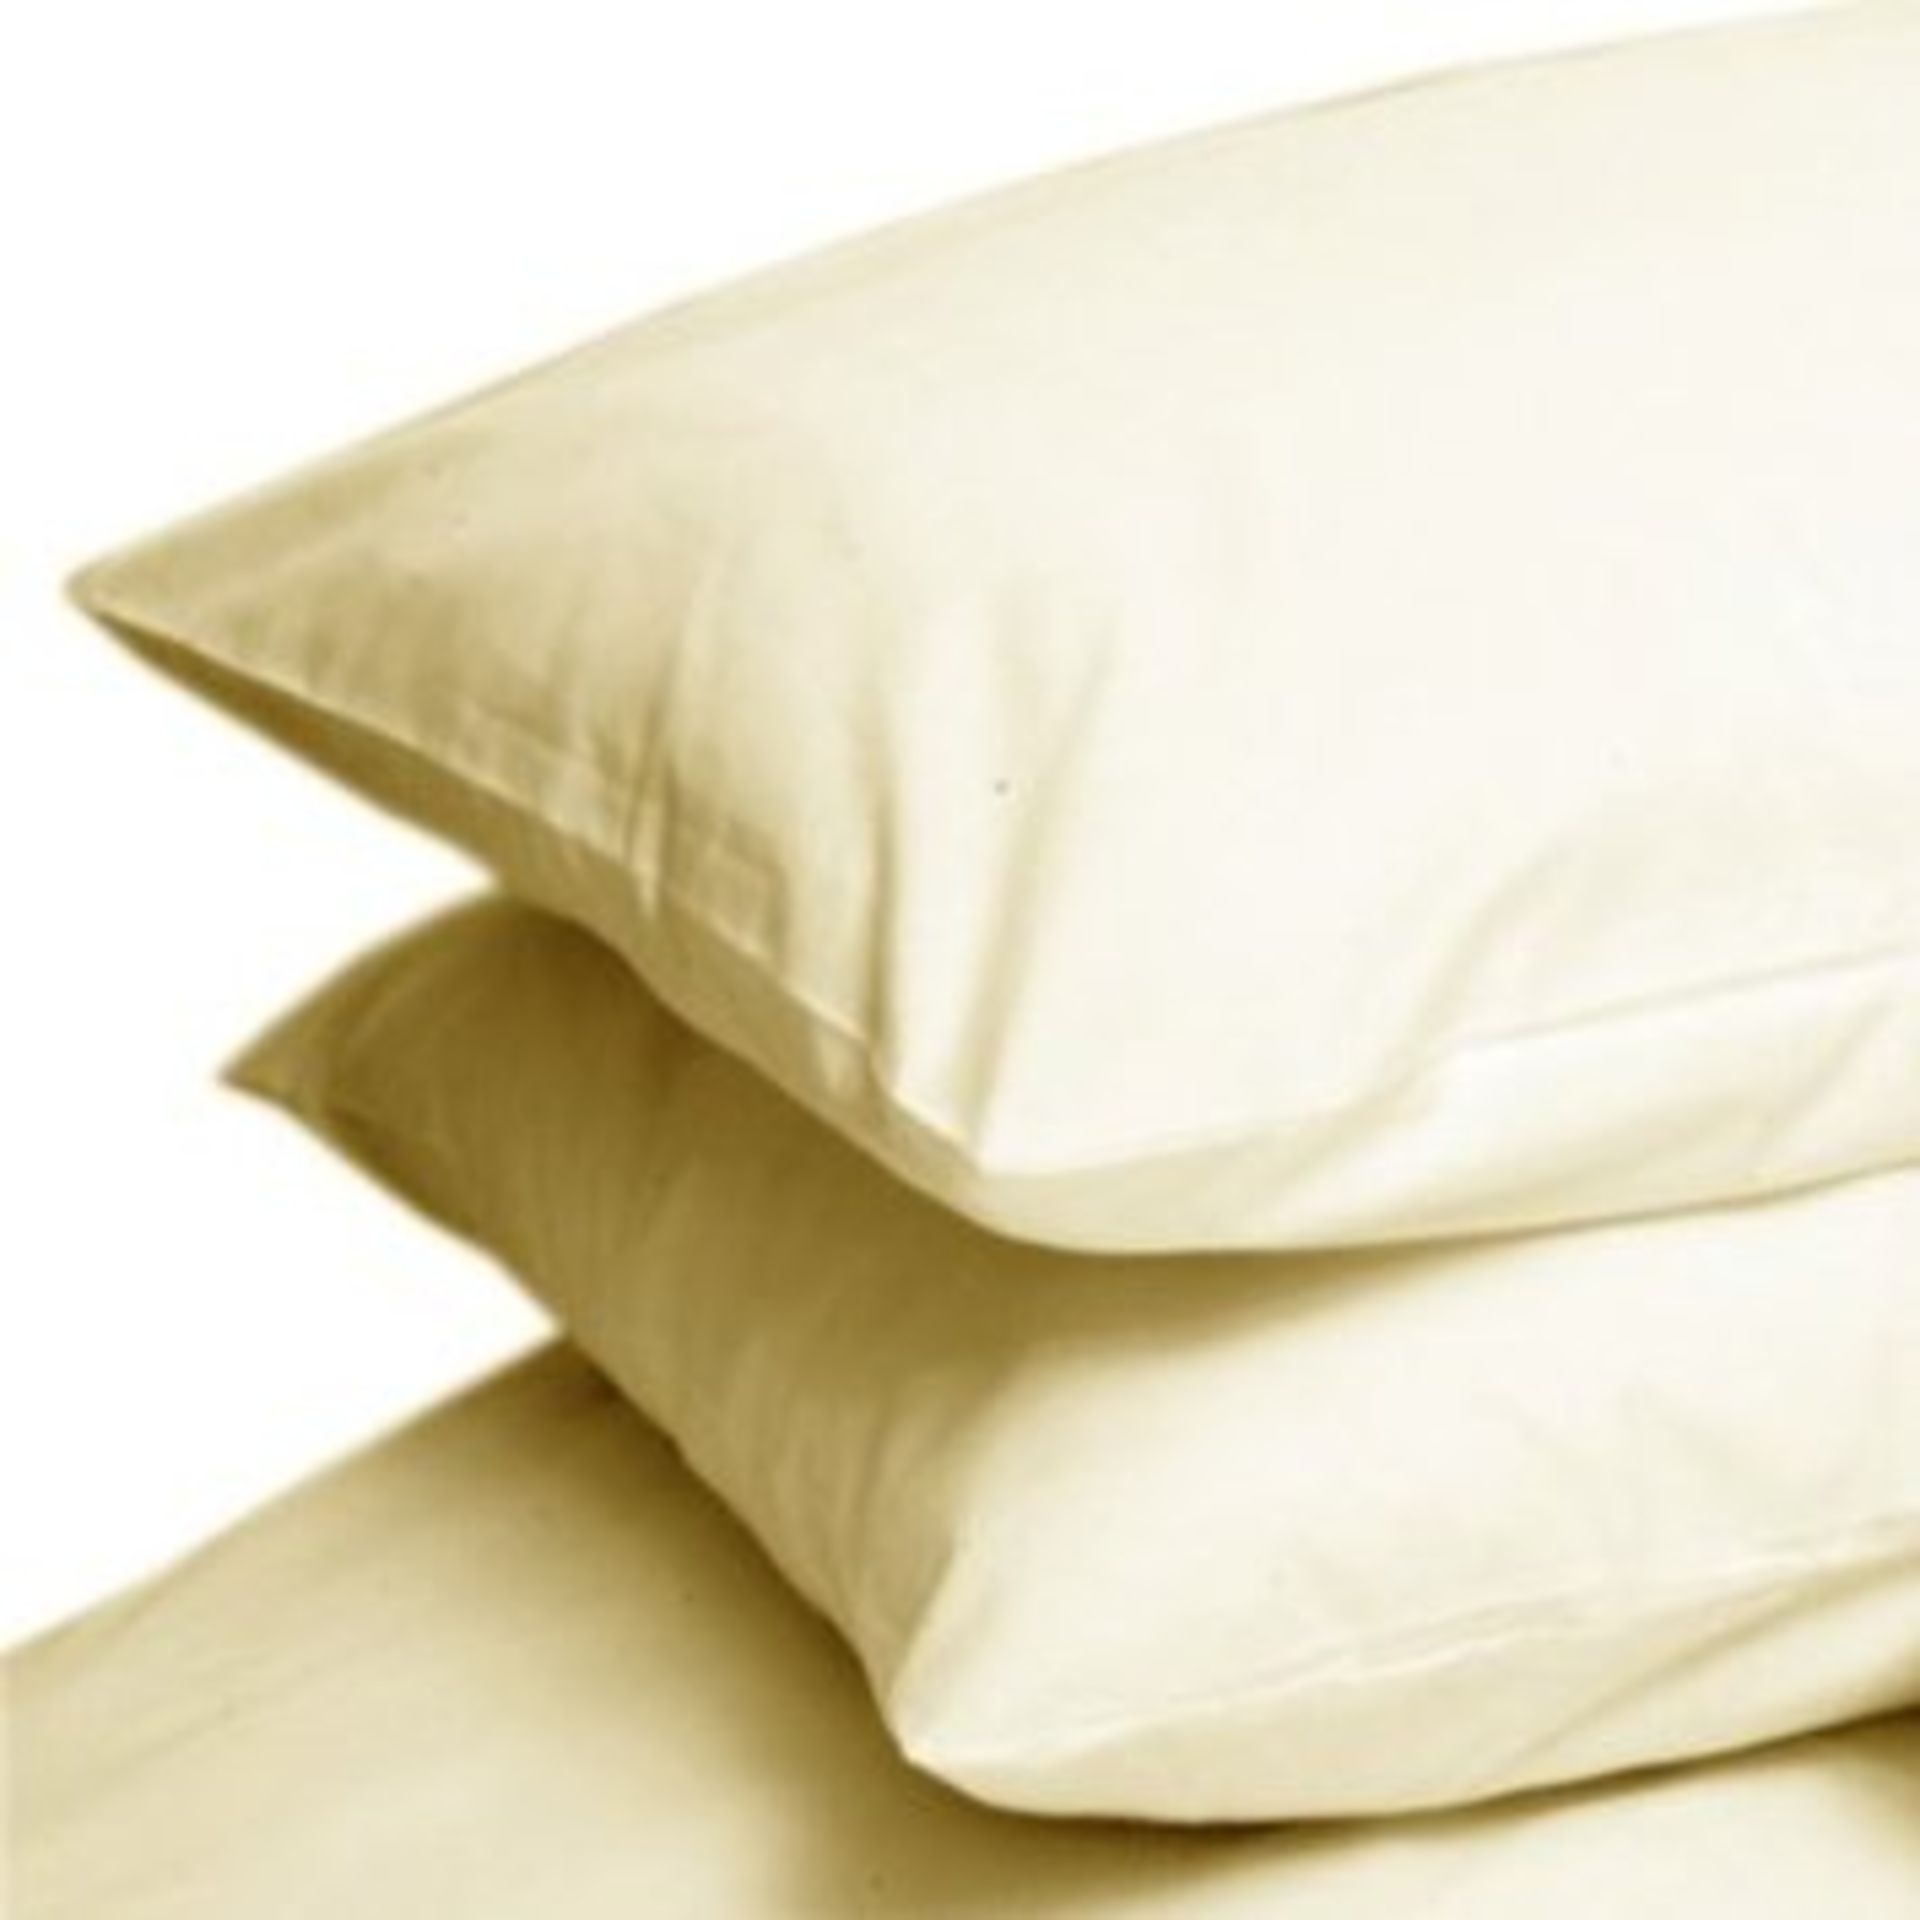 V *TRADE QTY* Brand New Sleep & Dream Pair Of Luxury Percale Plain Dyed Pillowcases 20"x30" Approx